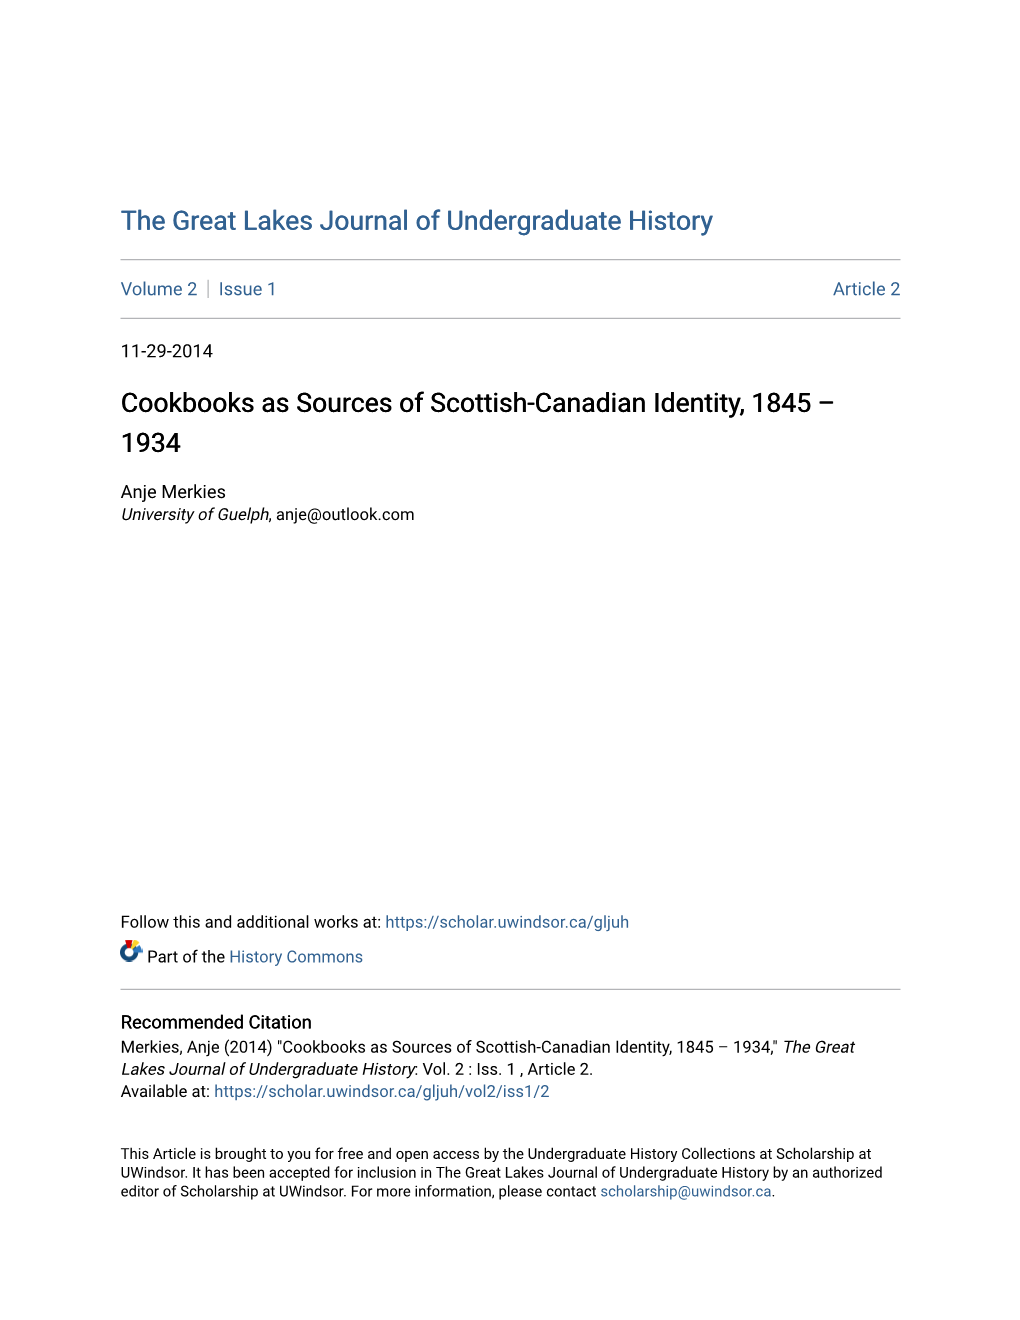 Cookbooks As Sources of Scottish-Canadian Identity, 1845 – 1934